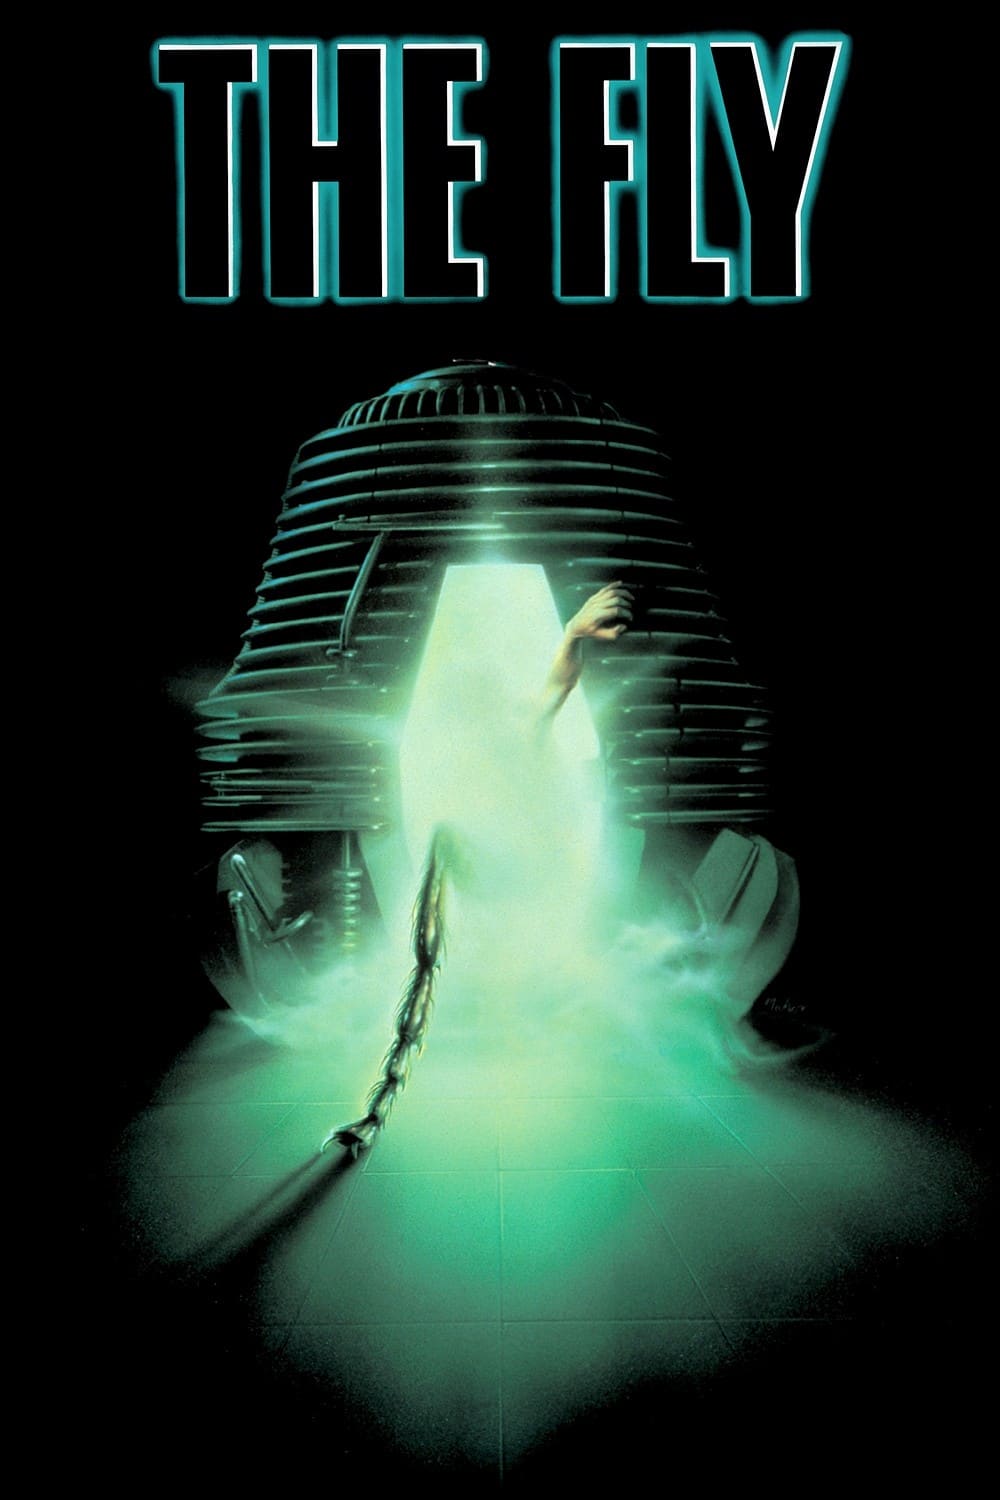 Poster for the movie "The Fly"